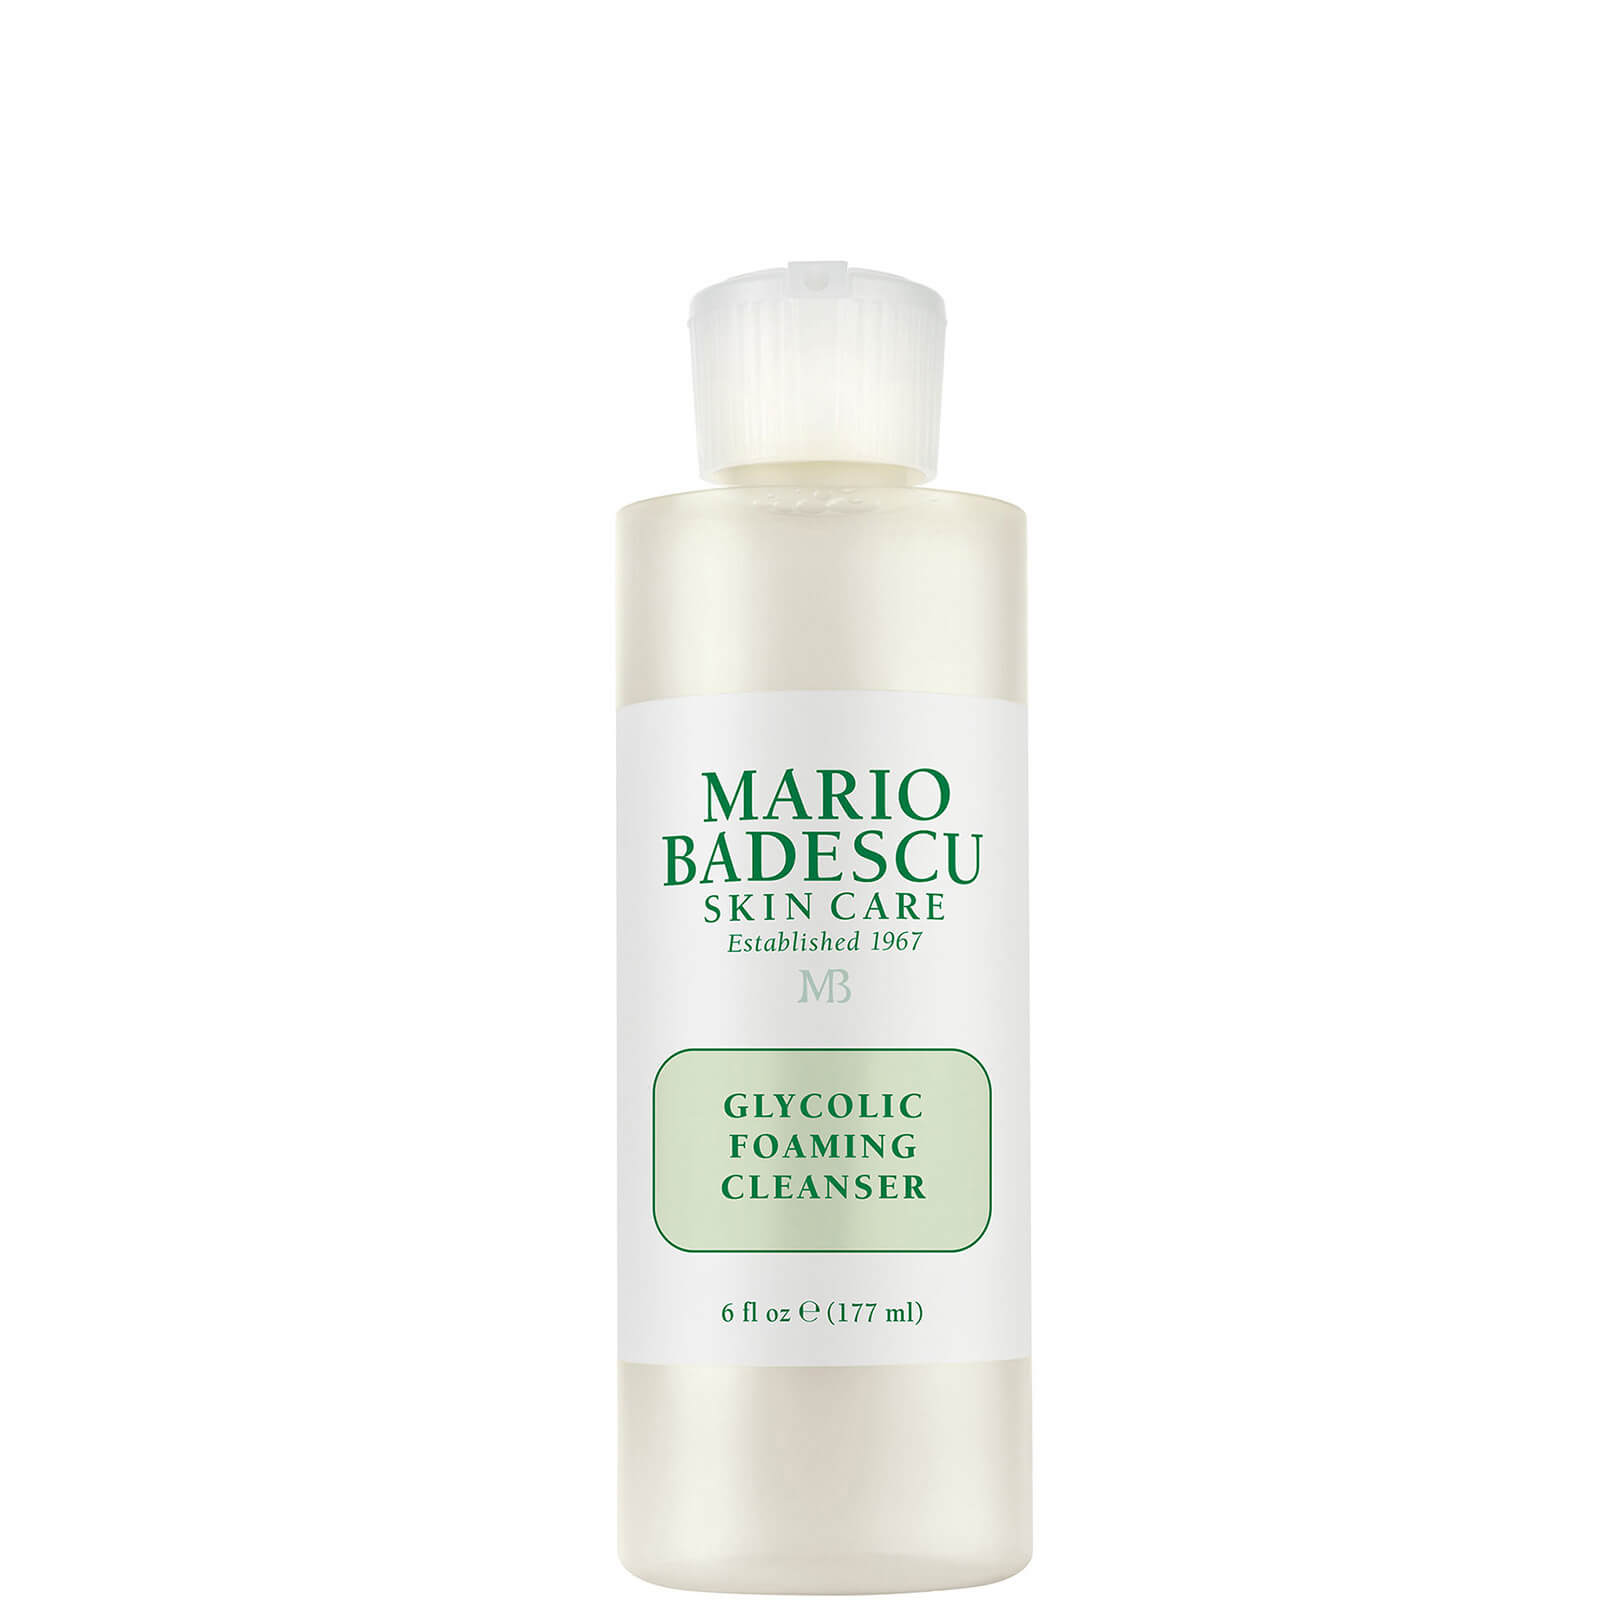 Image of Mario Badescu Glycolic Foaming Cleanser - 177ml